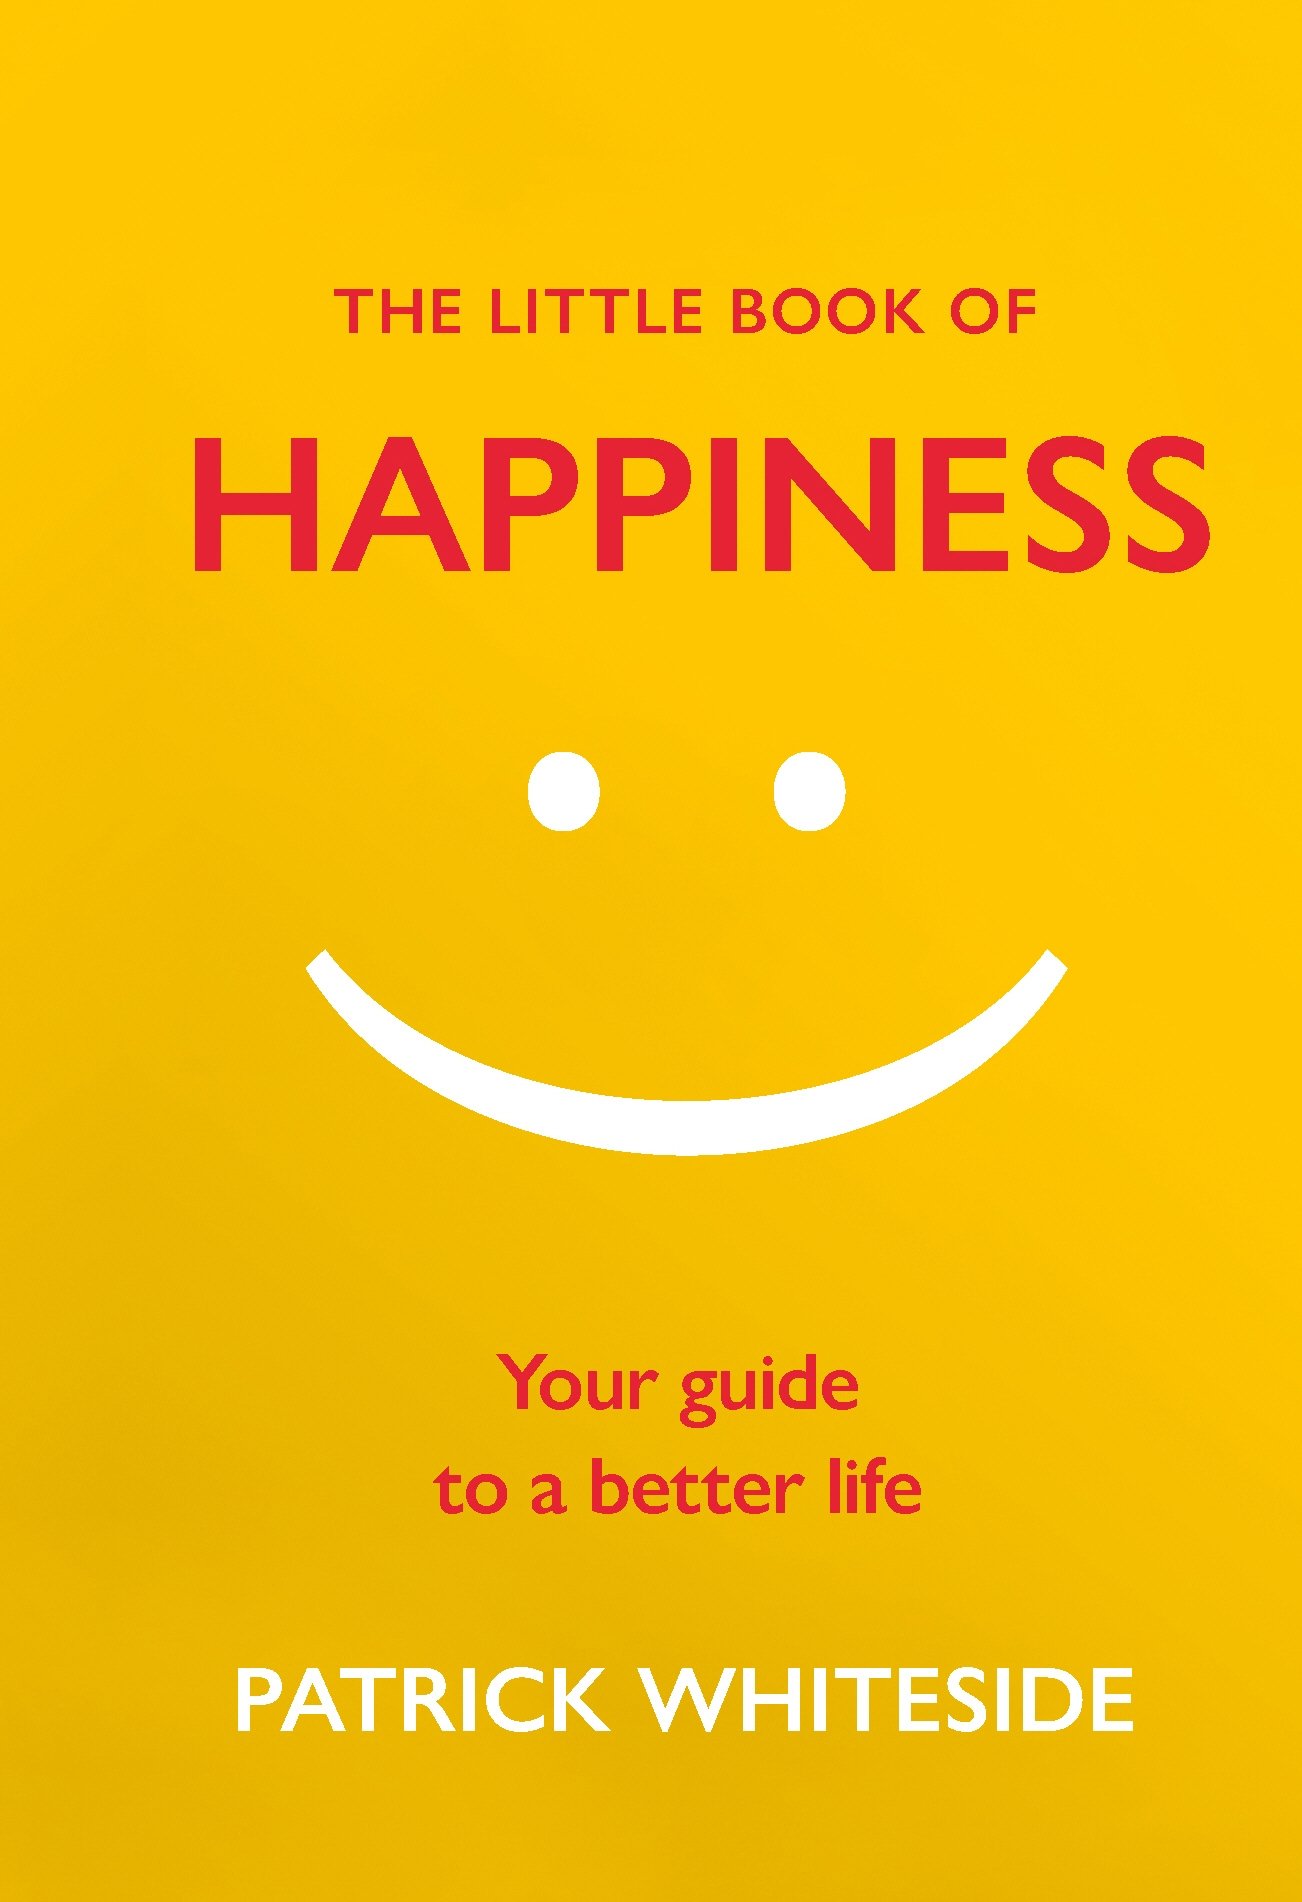 The Little Book of Happiness | Patrick Whiteside